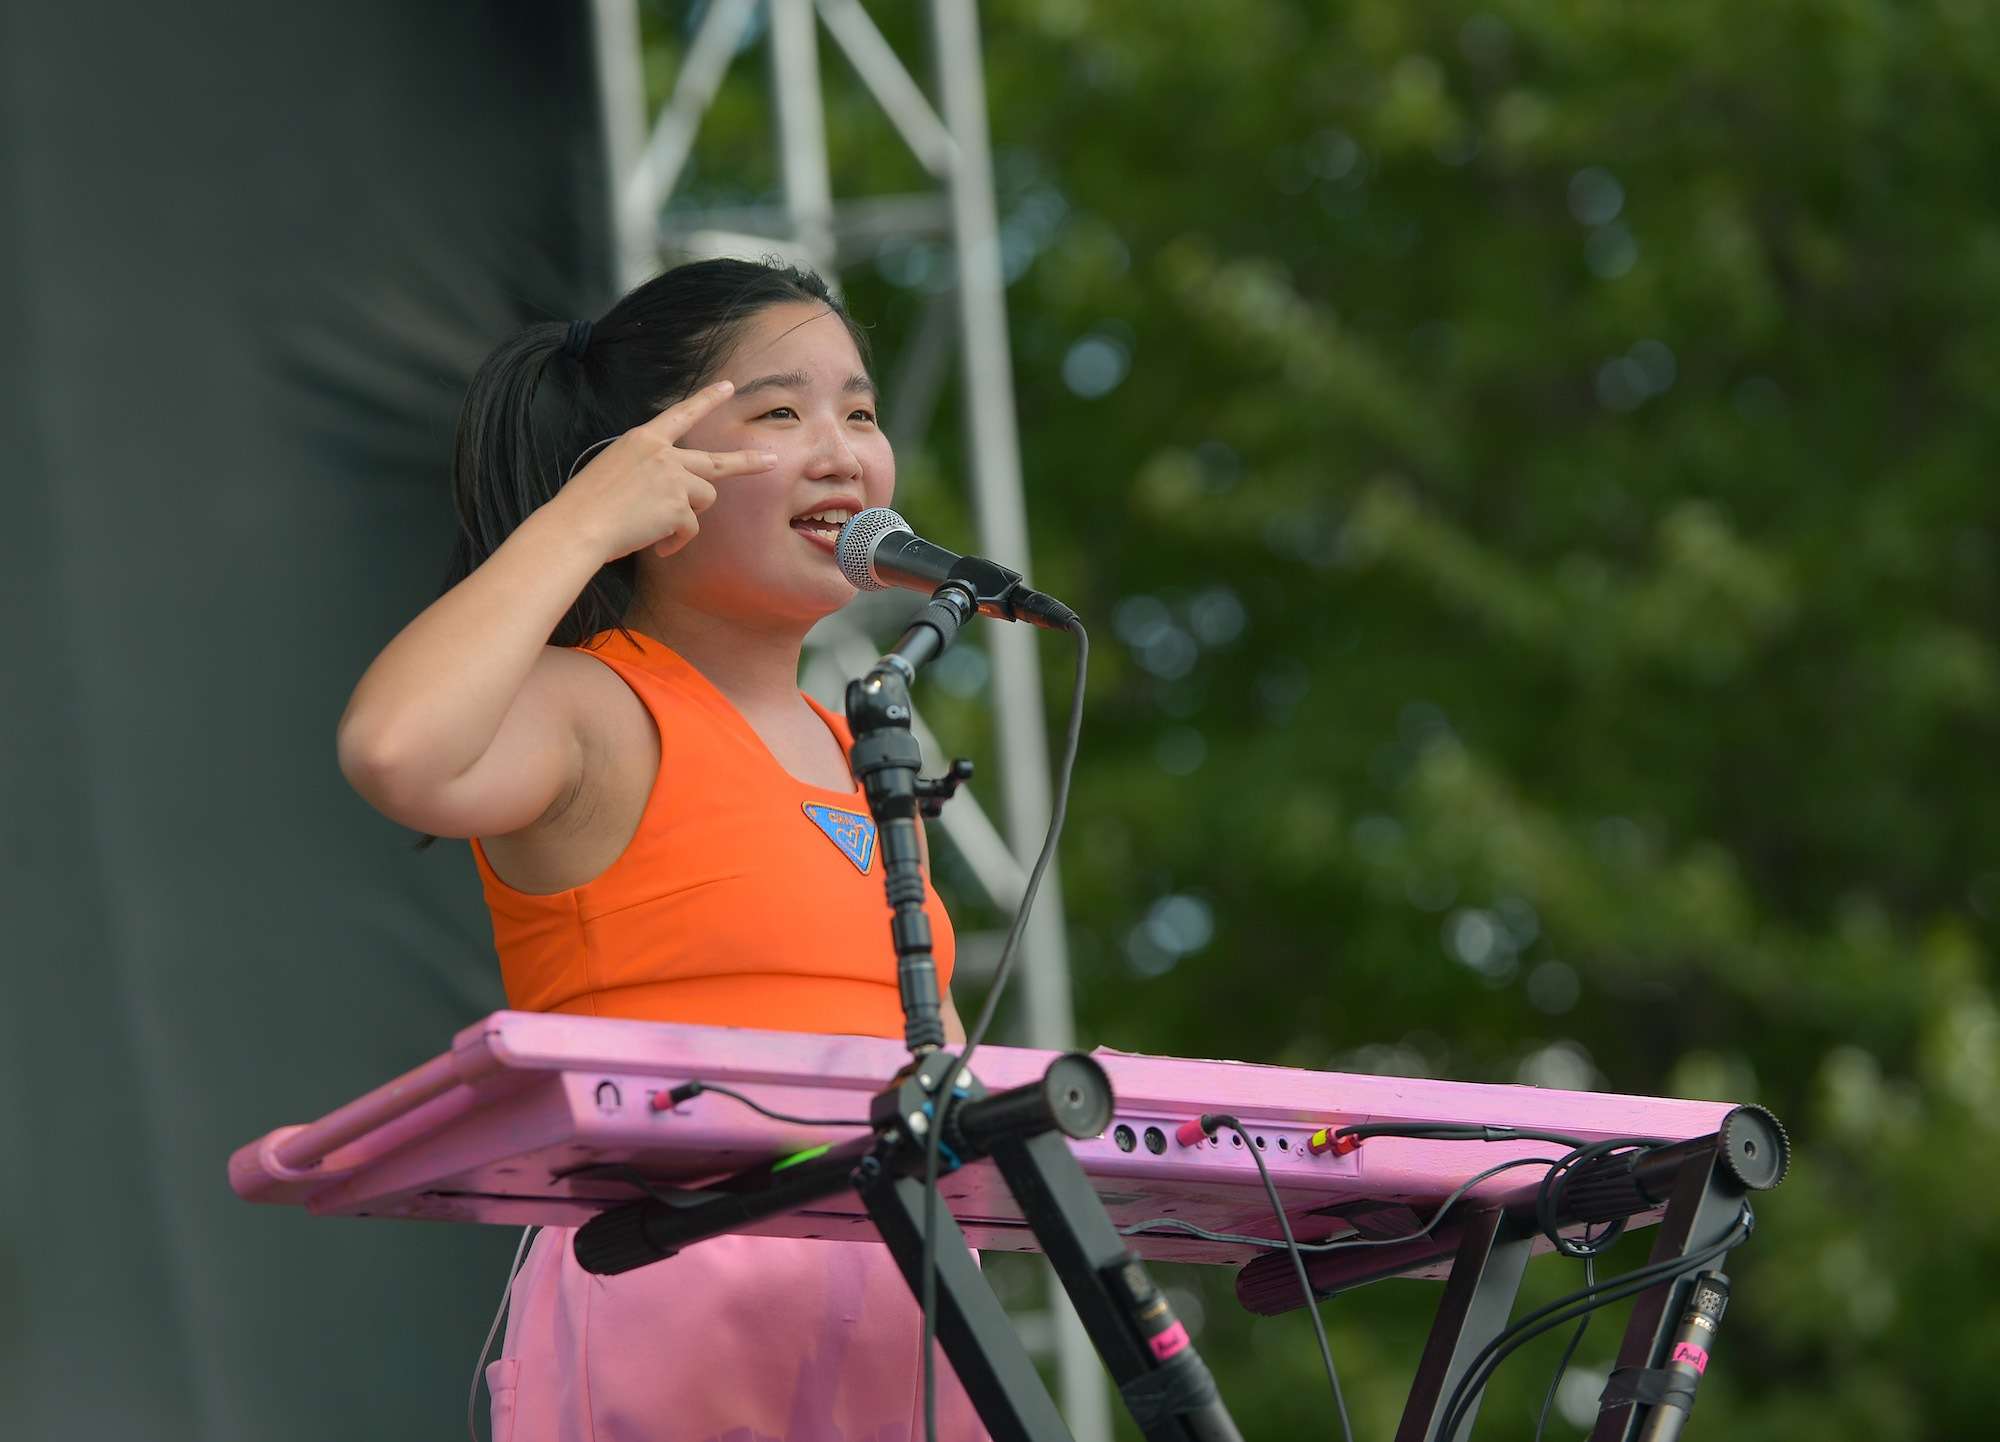 Chai Live at Pitchfork [GALLERY] 14